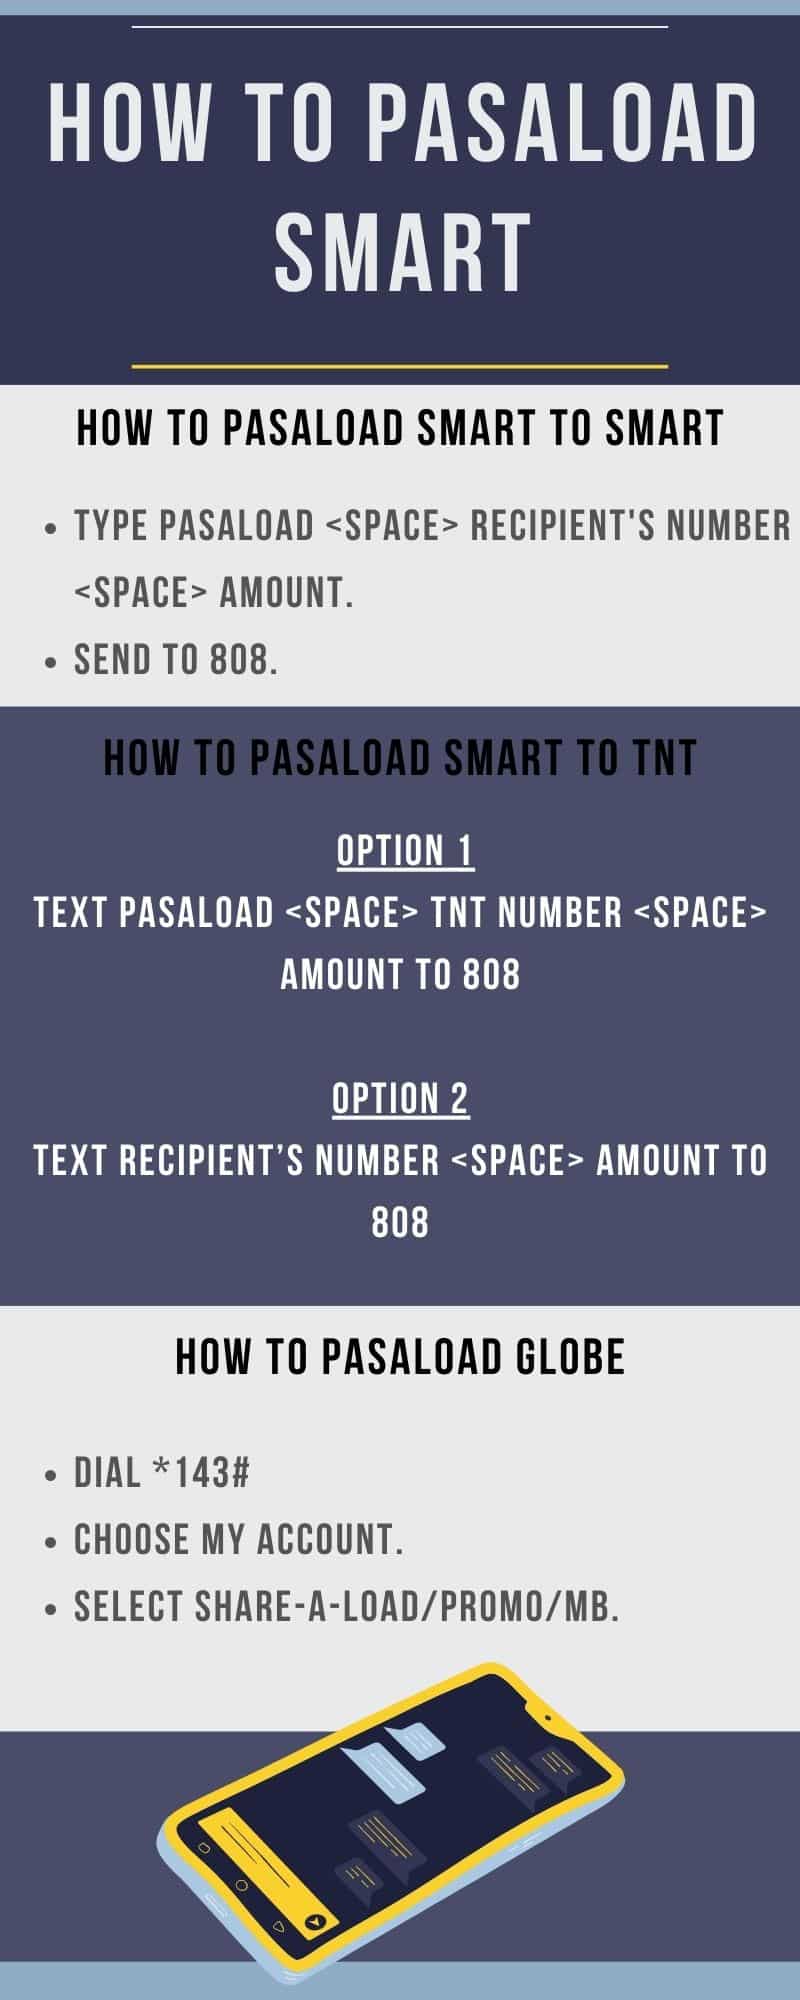 How to Pasaload Smart